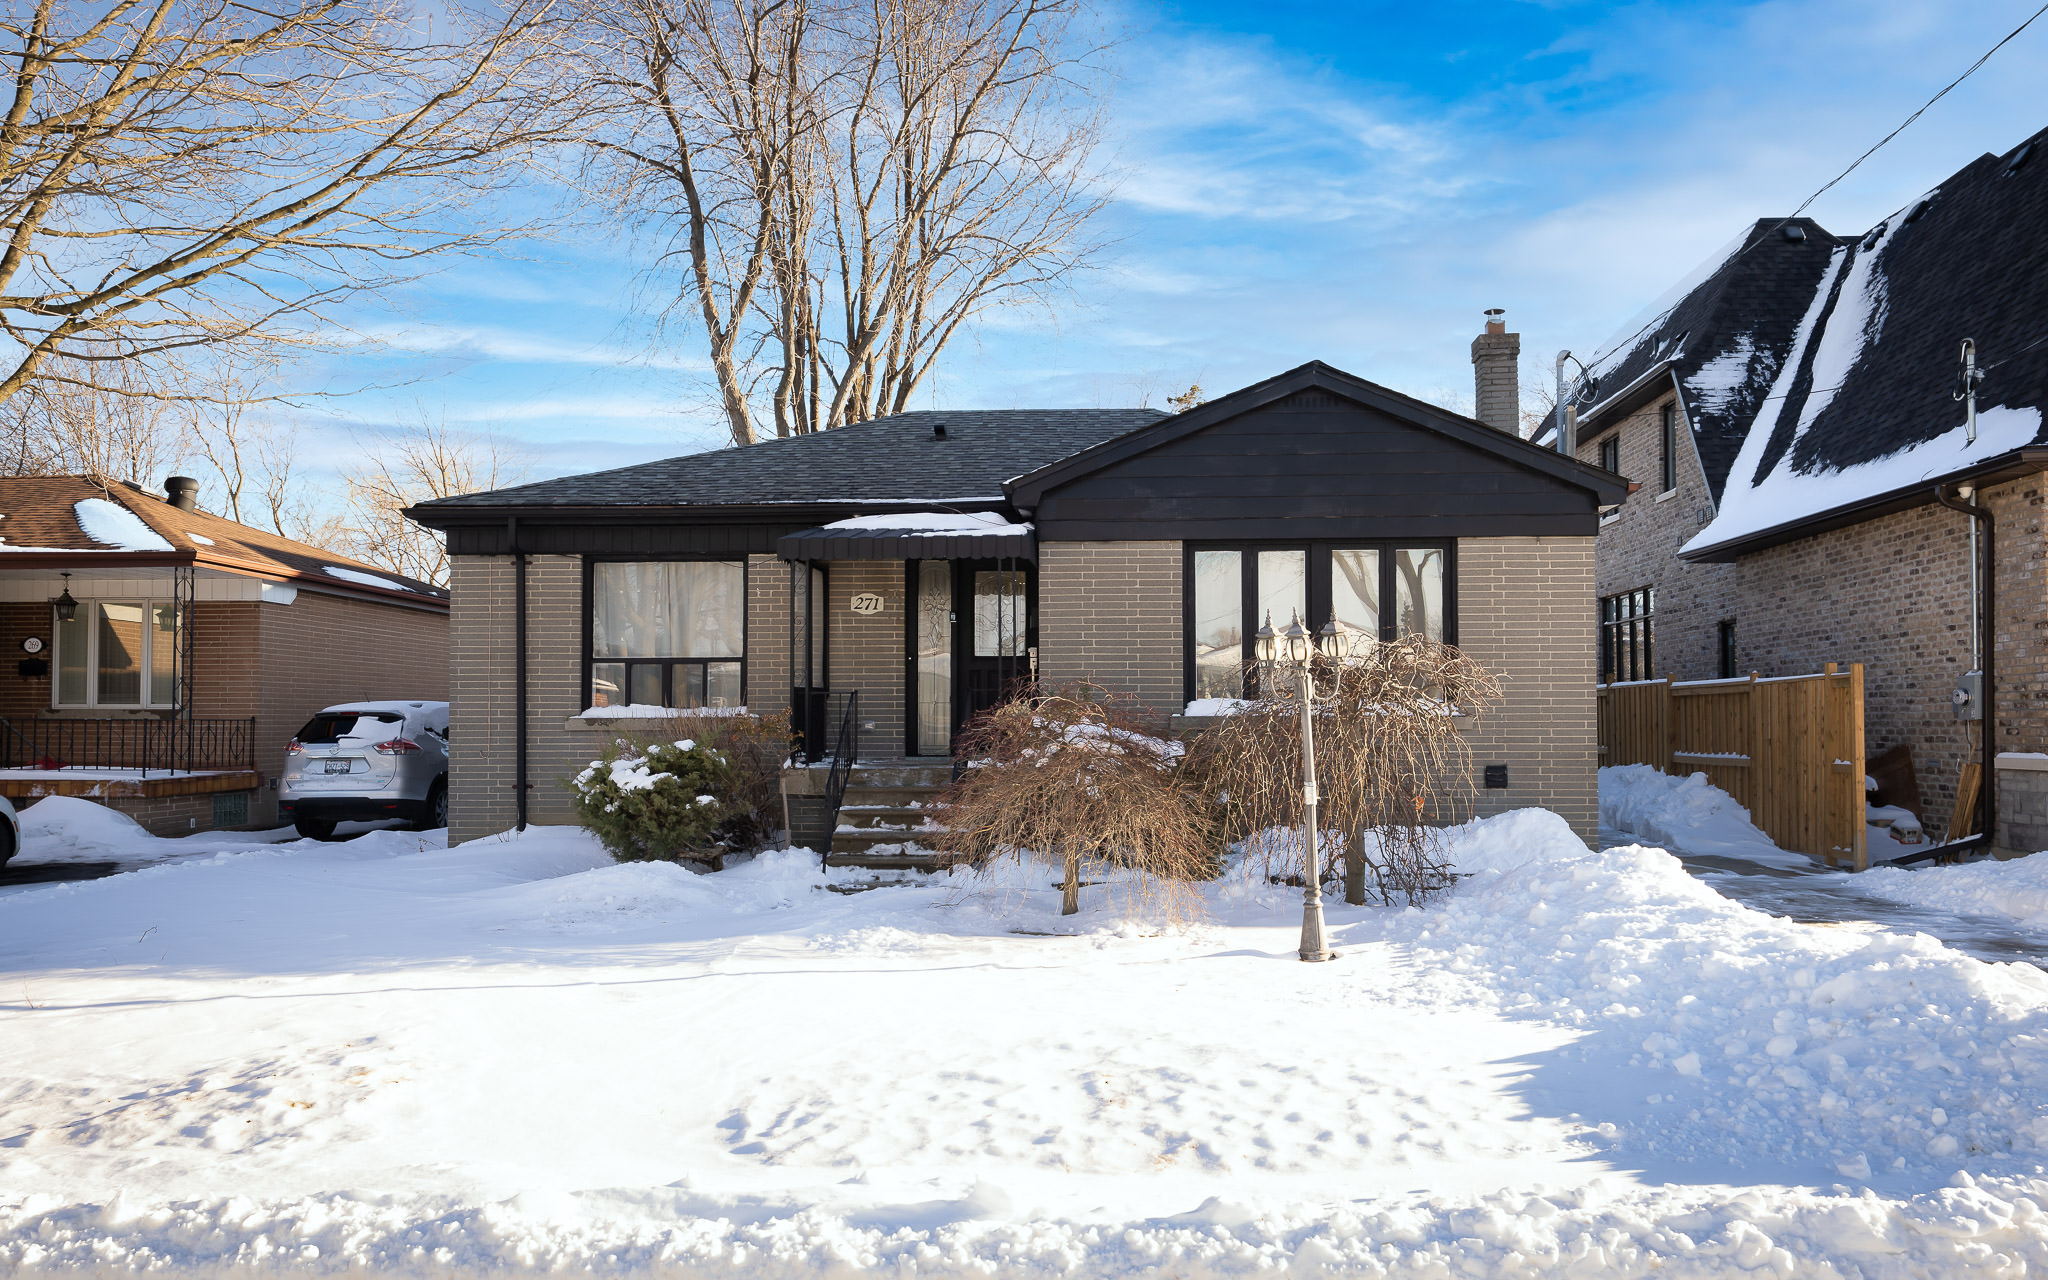 271 Waterloo Ave, North York, ON M3H 3Z6, Canada